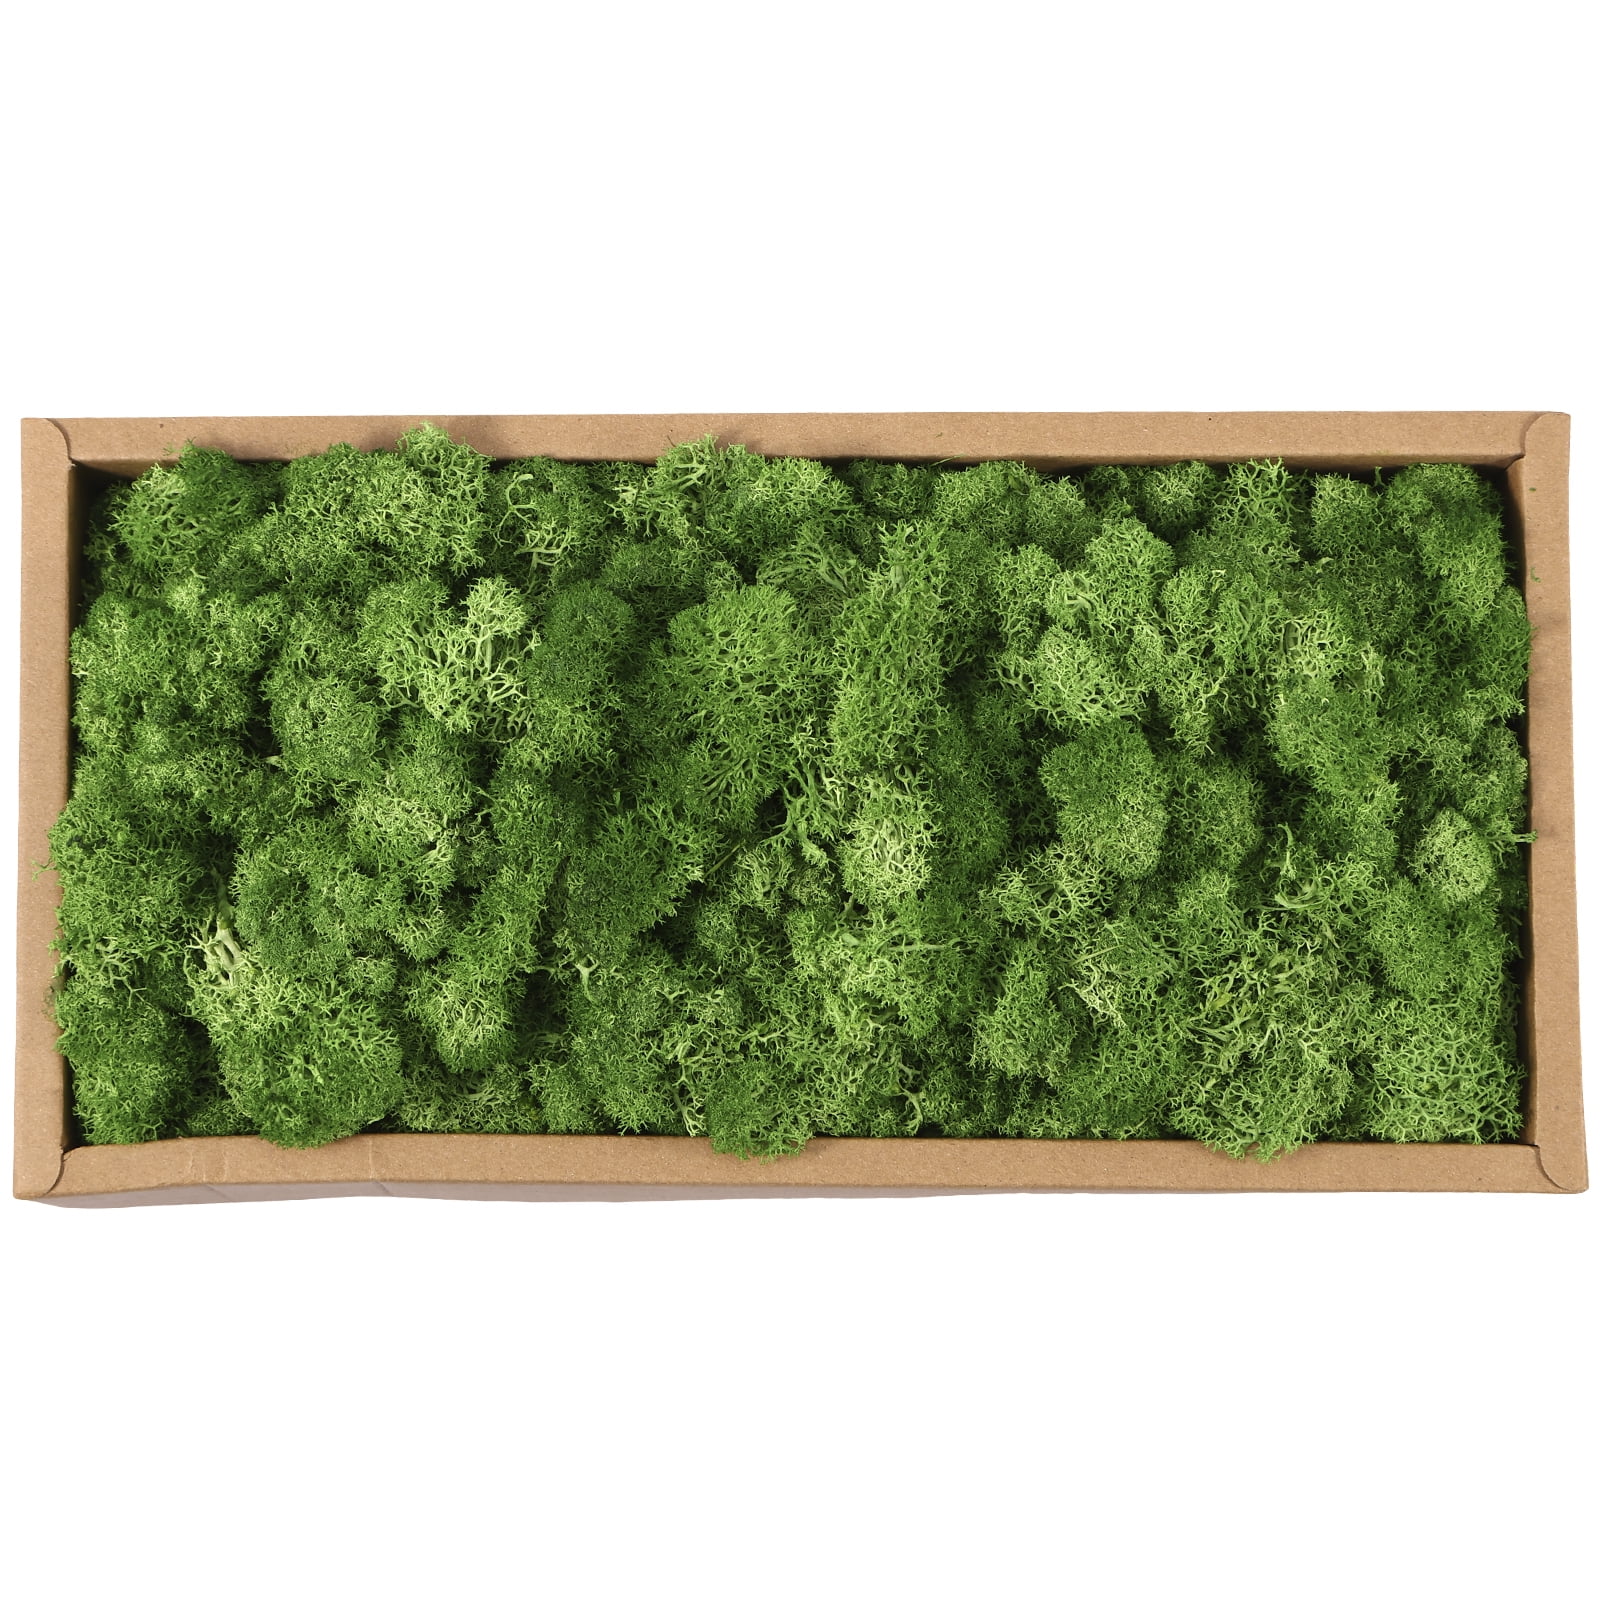  TCYPUHL Preserved Moss for Crafts Chartreuse Reindeer Moss for  Potted Plants, Craft Decorative Moss Decor for Wall Art, Dried Moss(7oz,  Chartreuse) : Arts, Crafts & Sewing